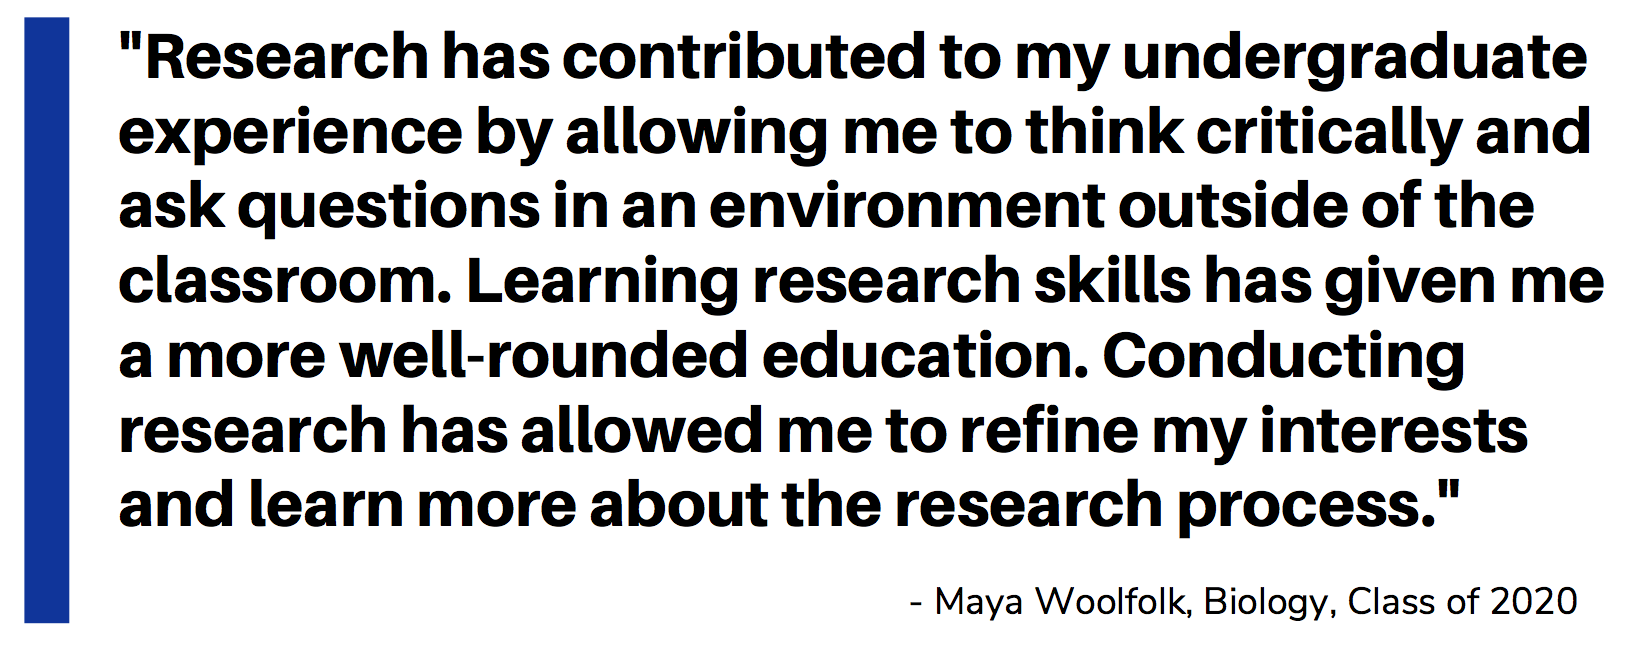 Quote_Student_Maya Woolfolk_Research has contributed to my undergraduate experience by allowing me to think critically and ask questions in an environment outside of the classroom. Learning research skills has given me a more well-rounded education. Conducting research has allowed me to refine my interests and learn more about the research process.